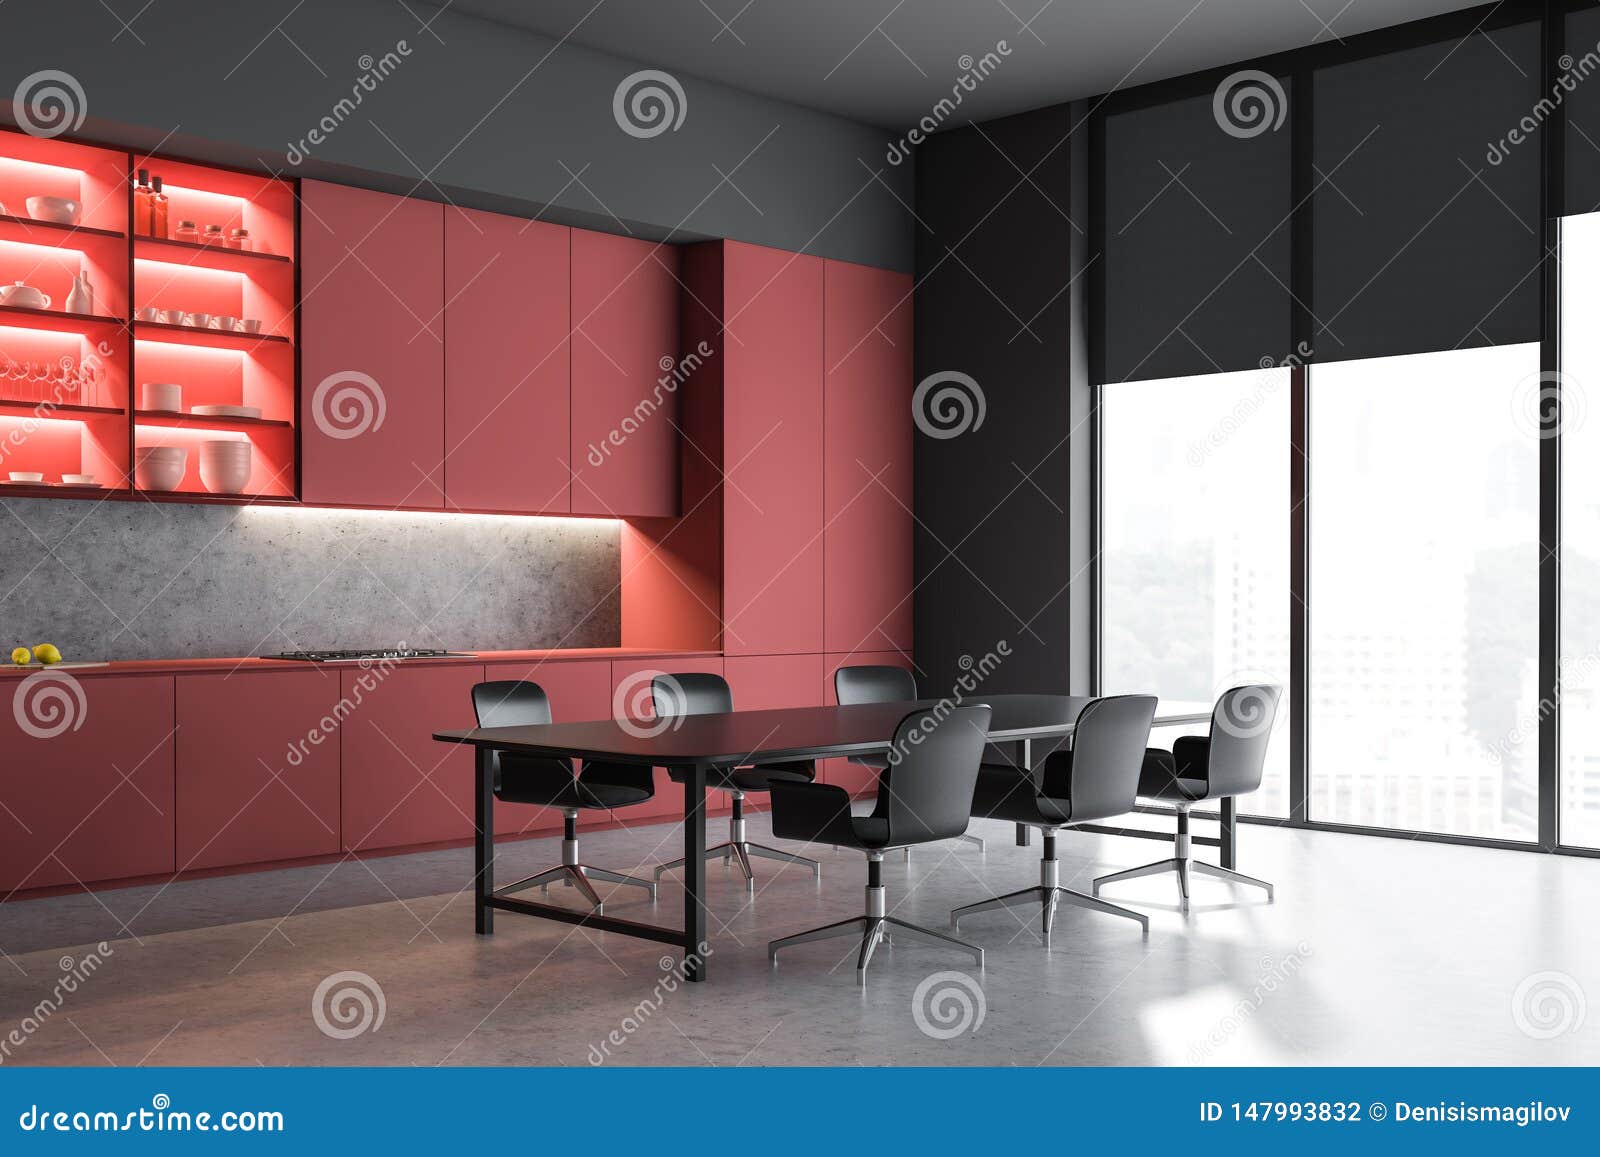 Red Kitchen Corner With Shelves And Table Stock Illustration